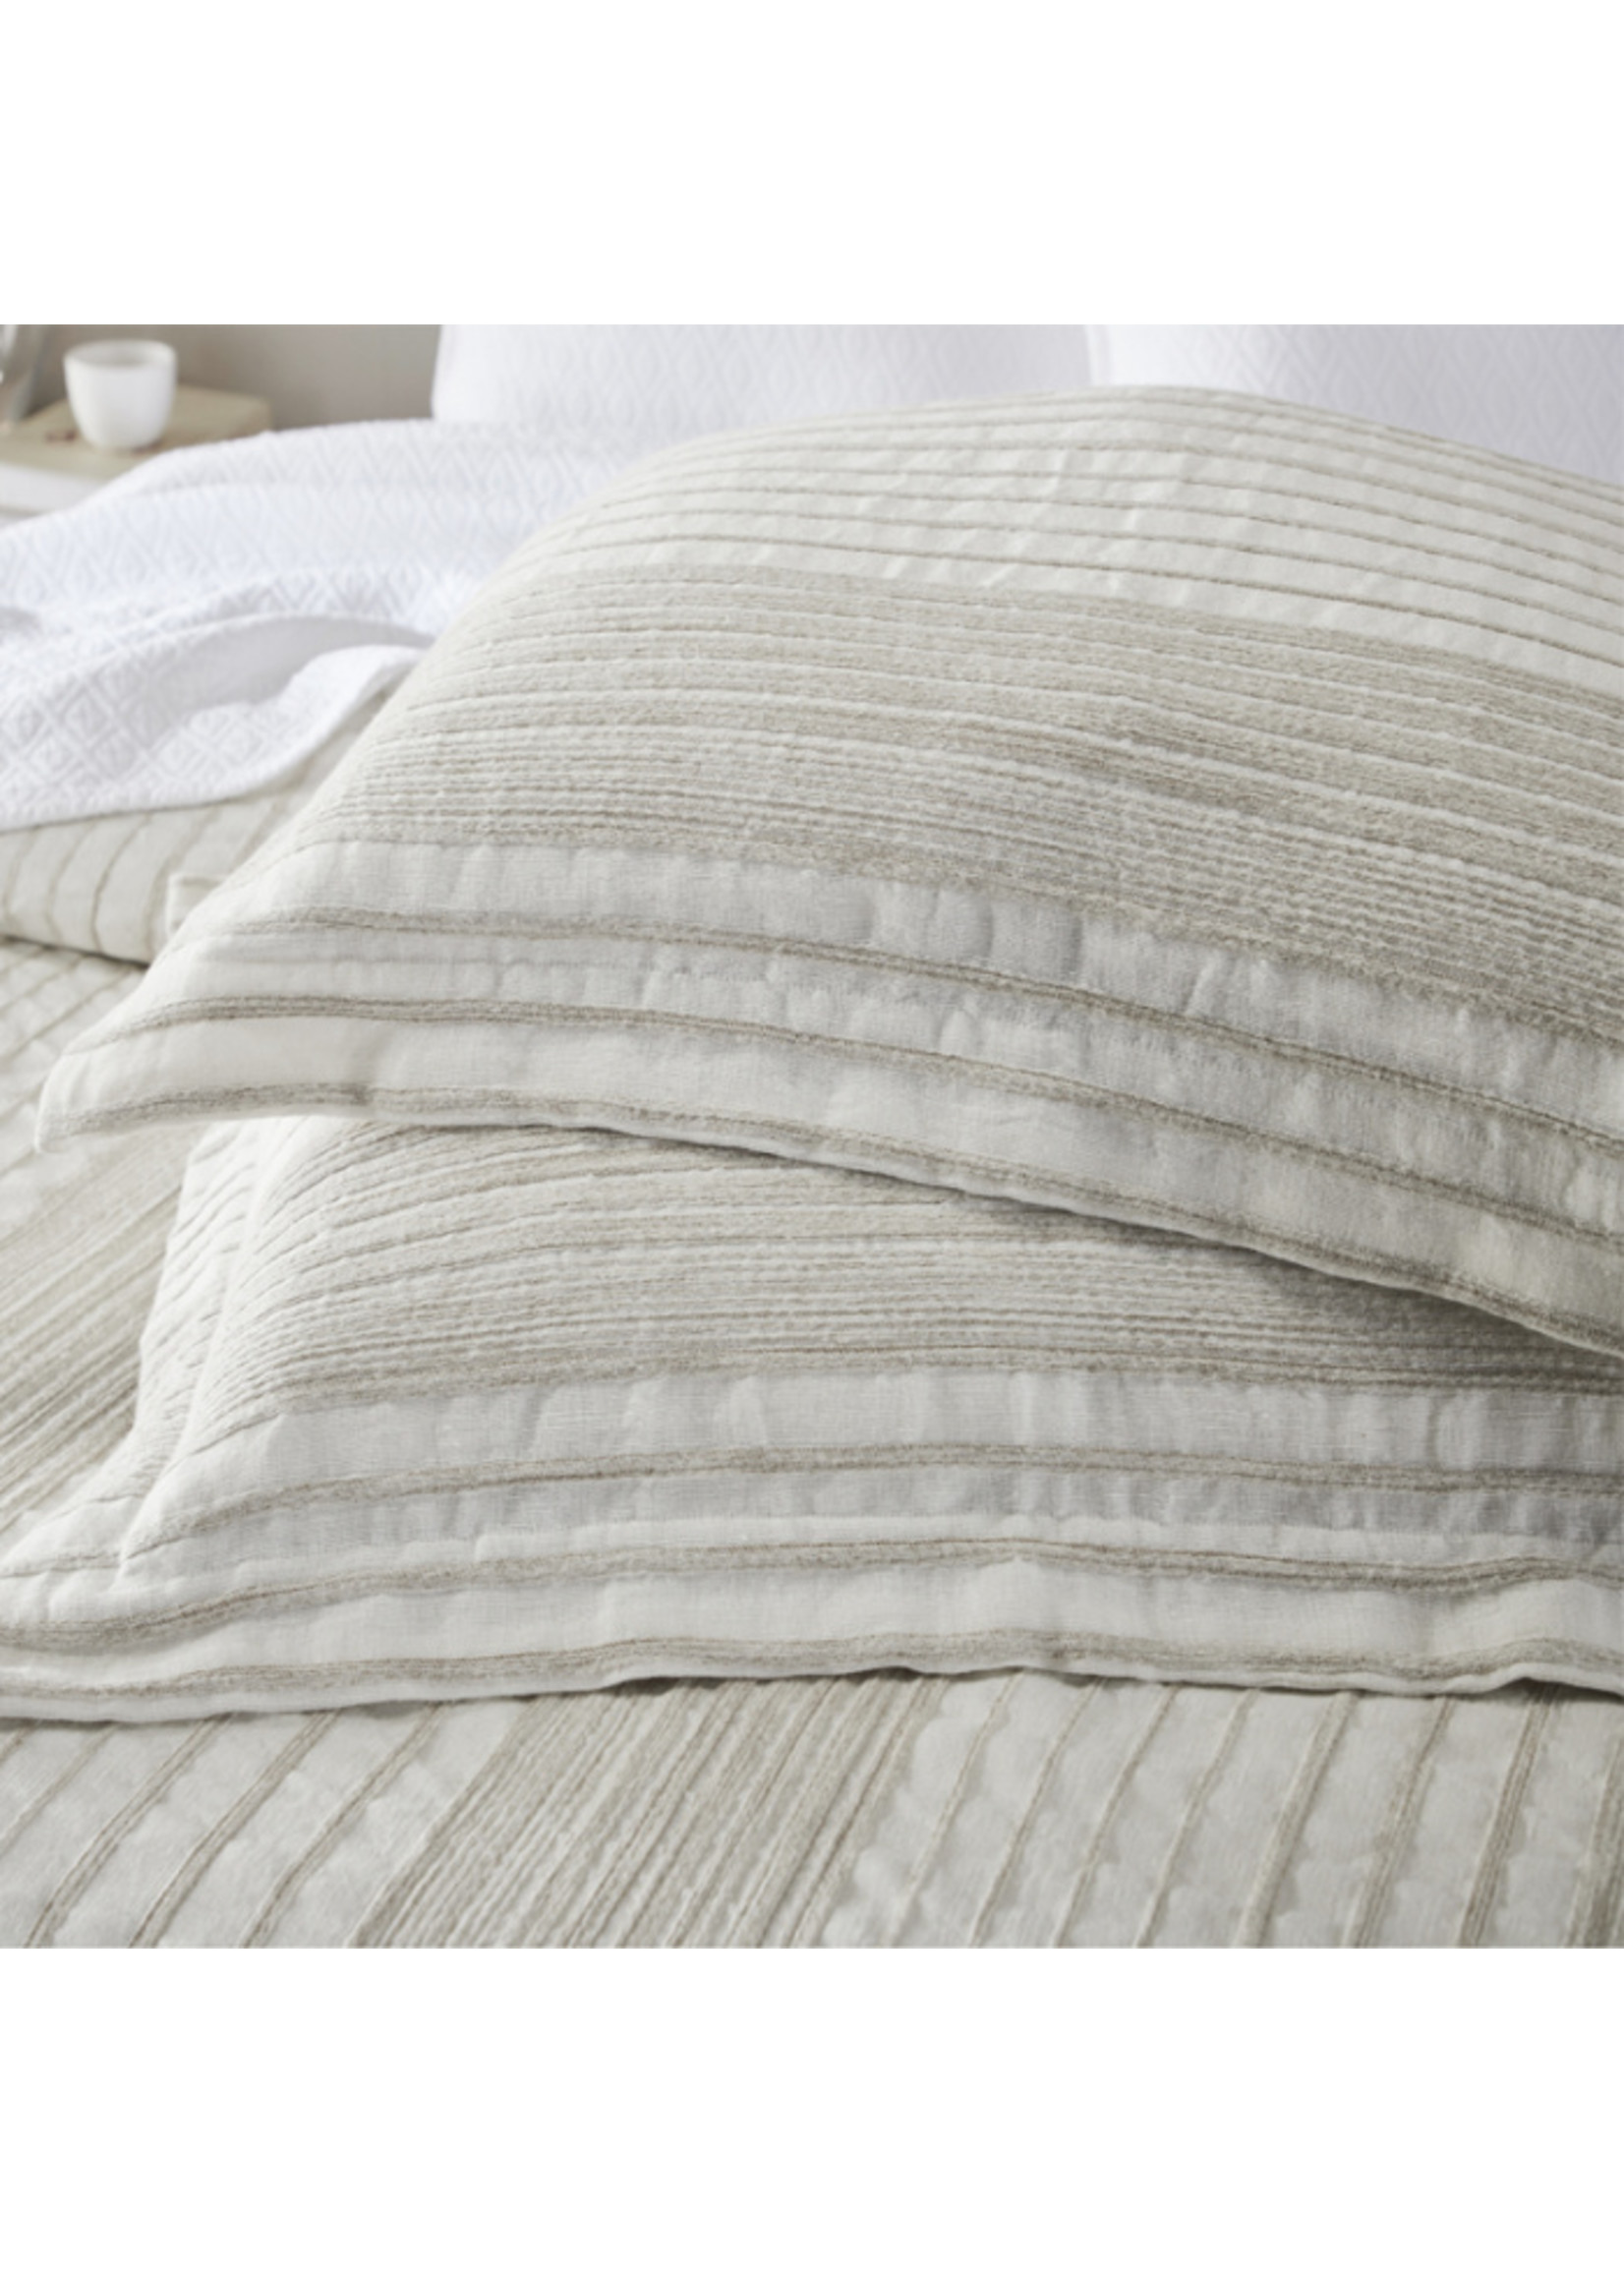 India's Heritage 92"W x 96"L, Natural White, Avalon Pure Linen Stripes Queen Duvet  Cover